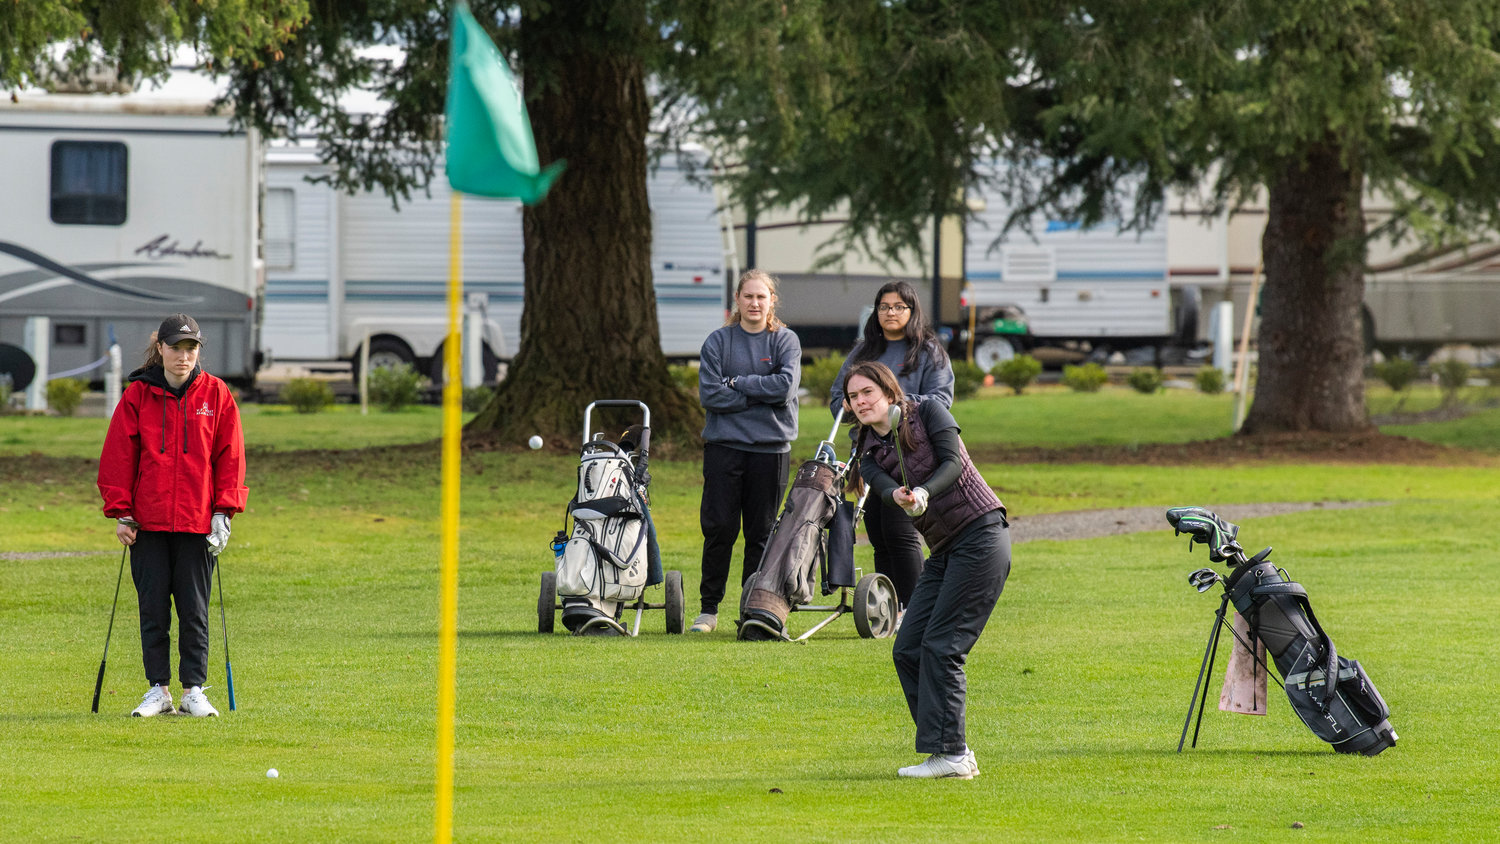 W.F. West junior Grace Oien hits a ball from the fairway at Riverside Golf Course Monday afternoon in Chehalis.